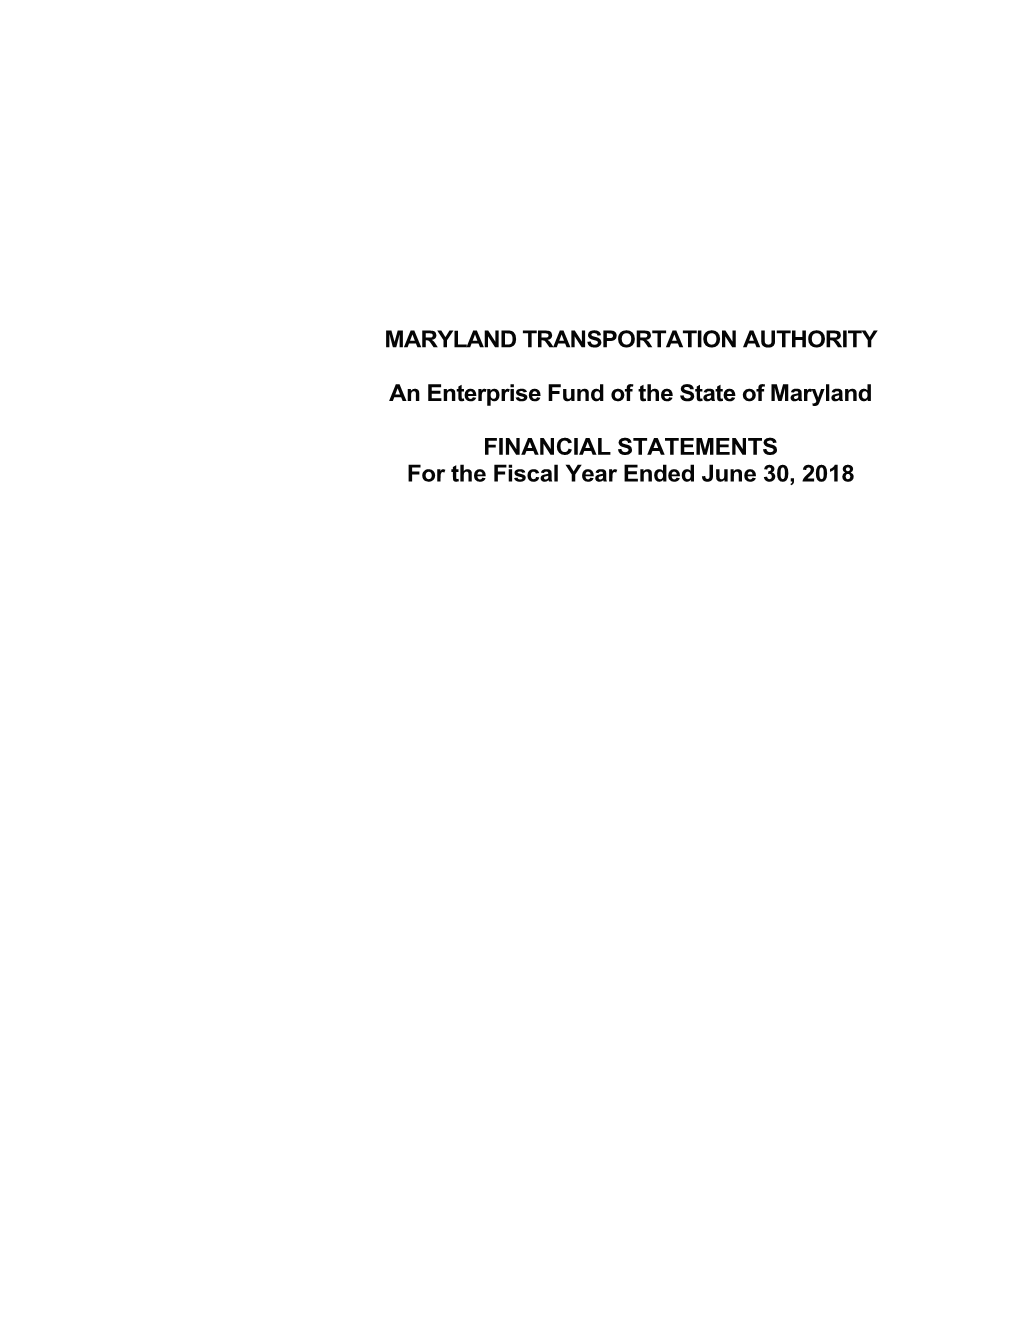 Maryland Transportation Authority Financial Statements for the Fiscal Year Ended June 30, 2018